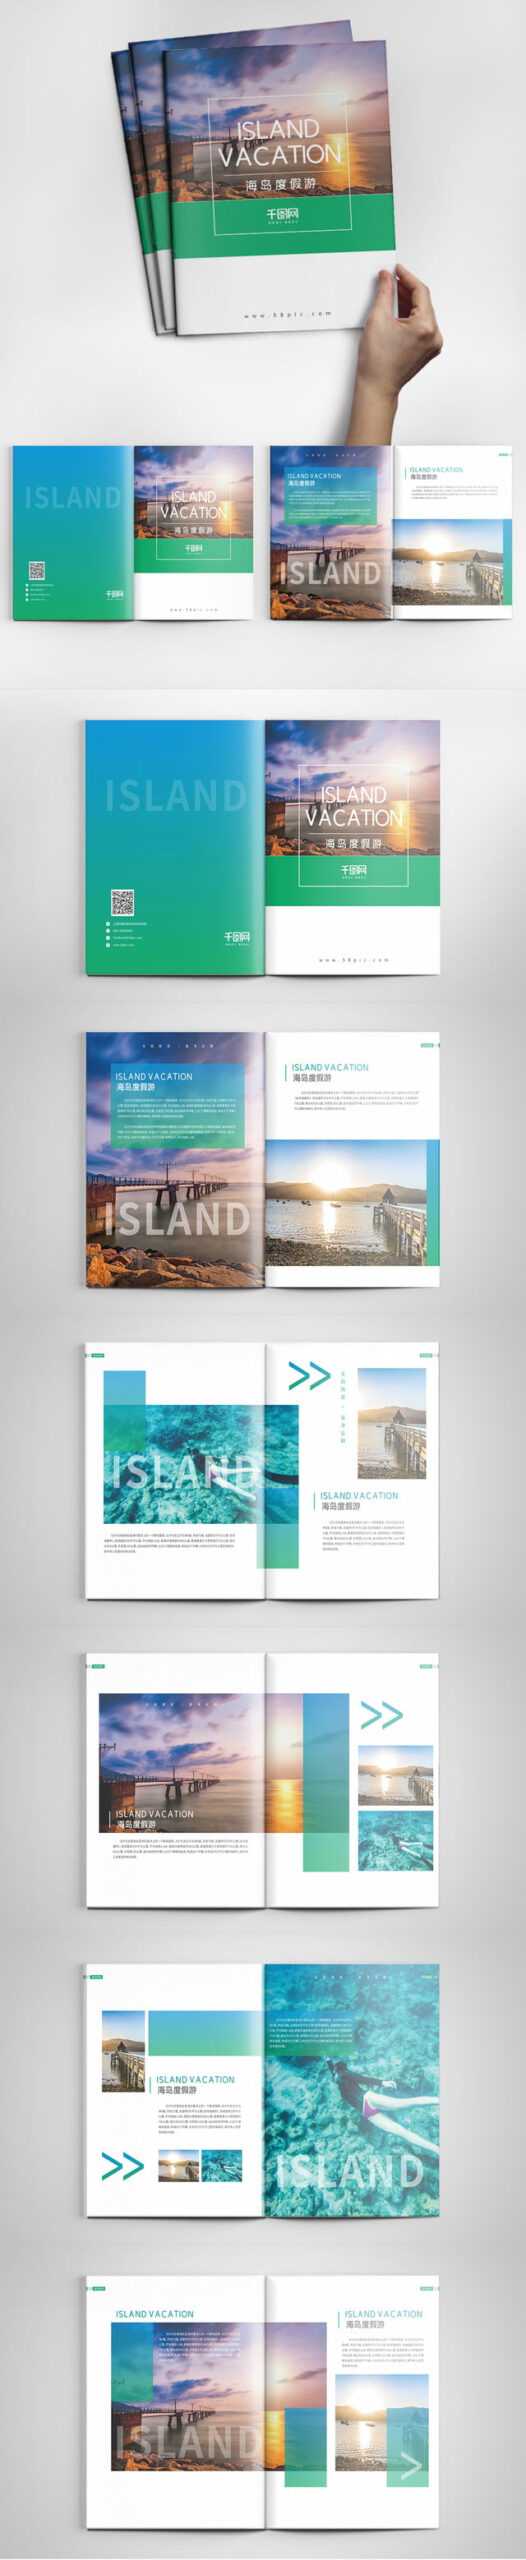 Island Tour Tourism Sea Album Template For Free Download On Within Island Brochure Template